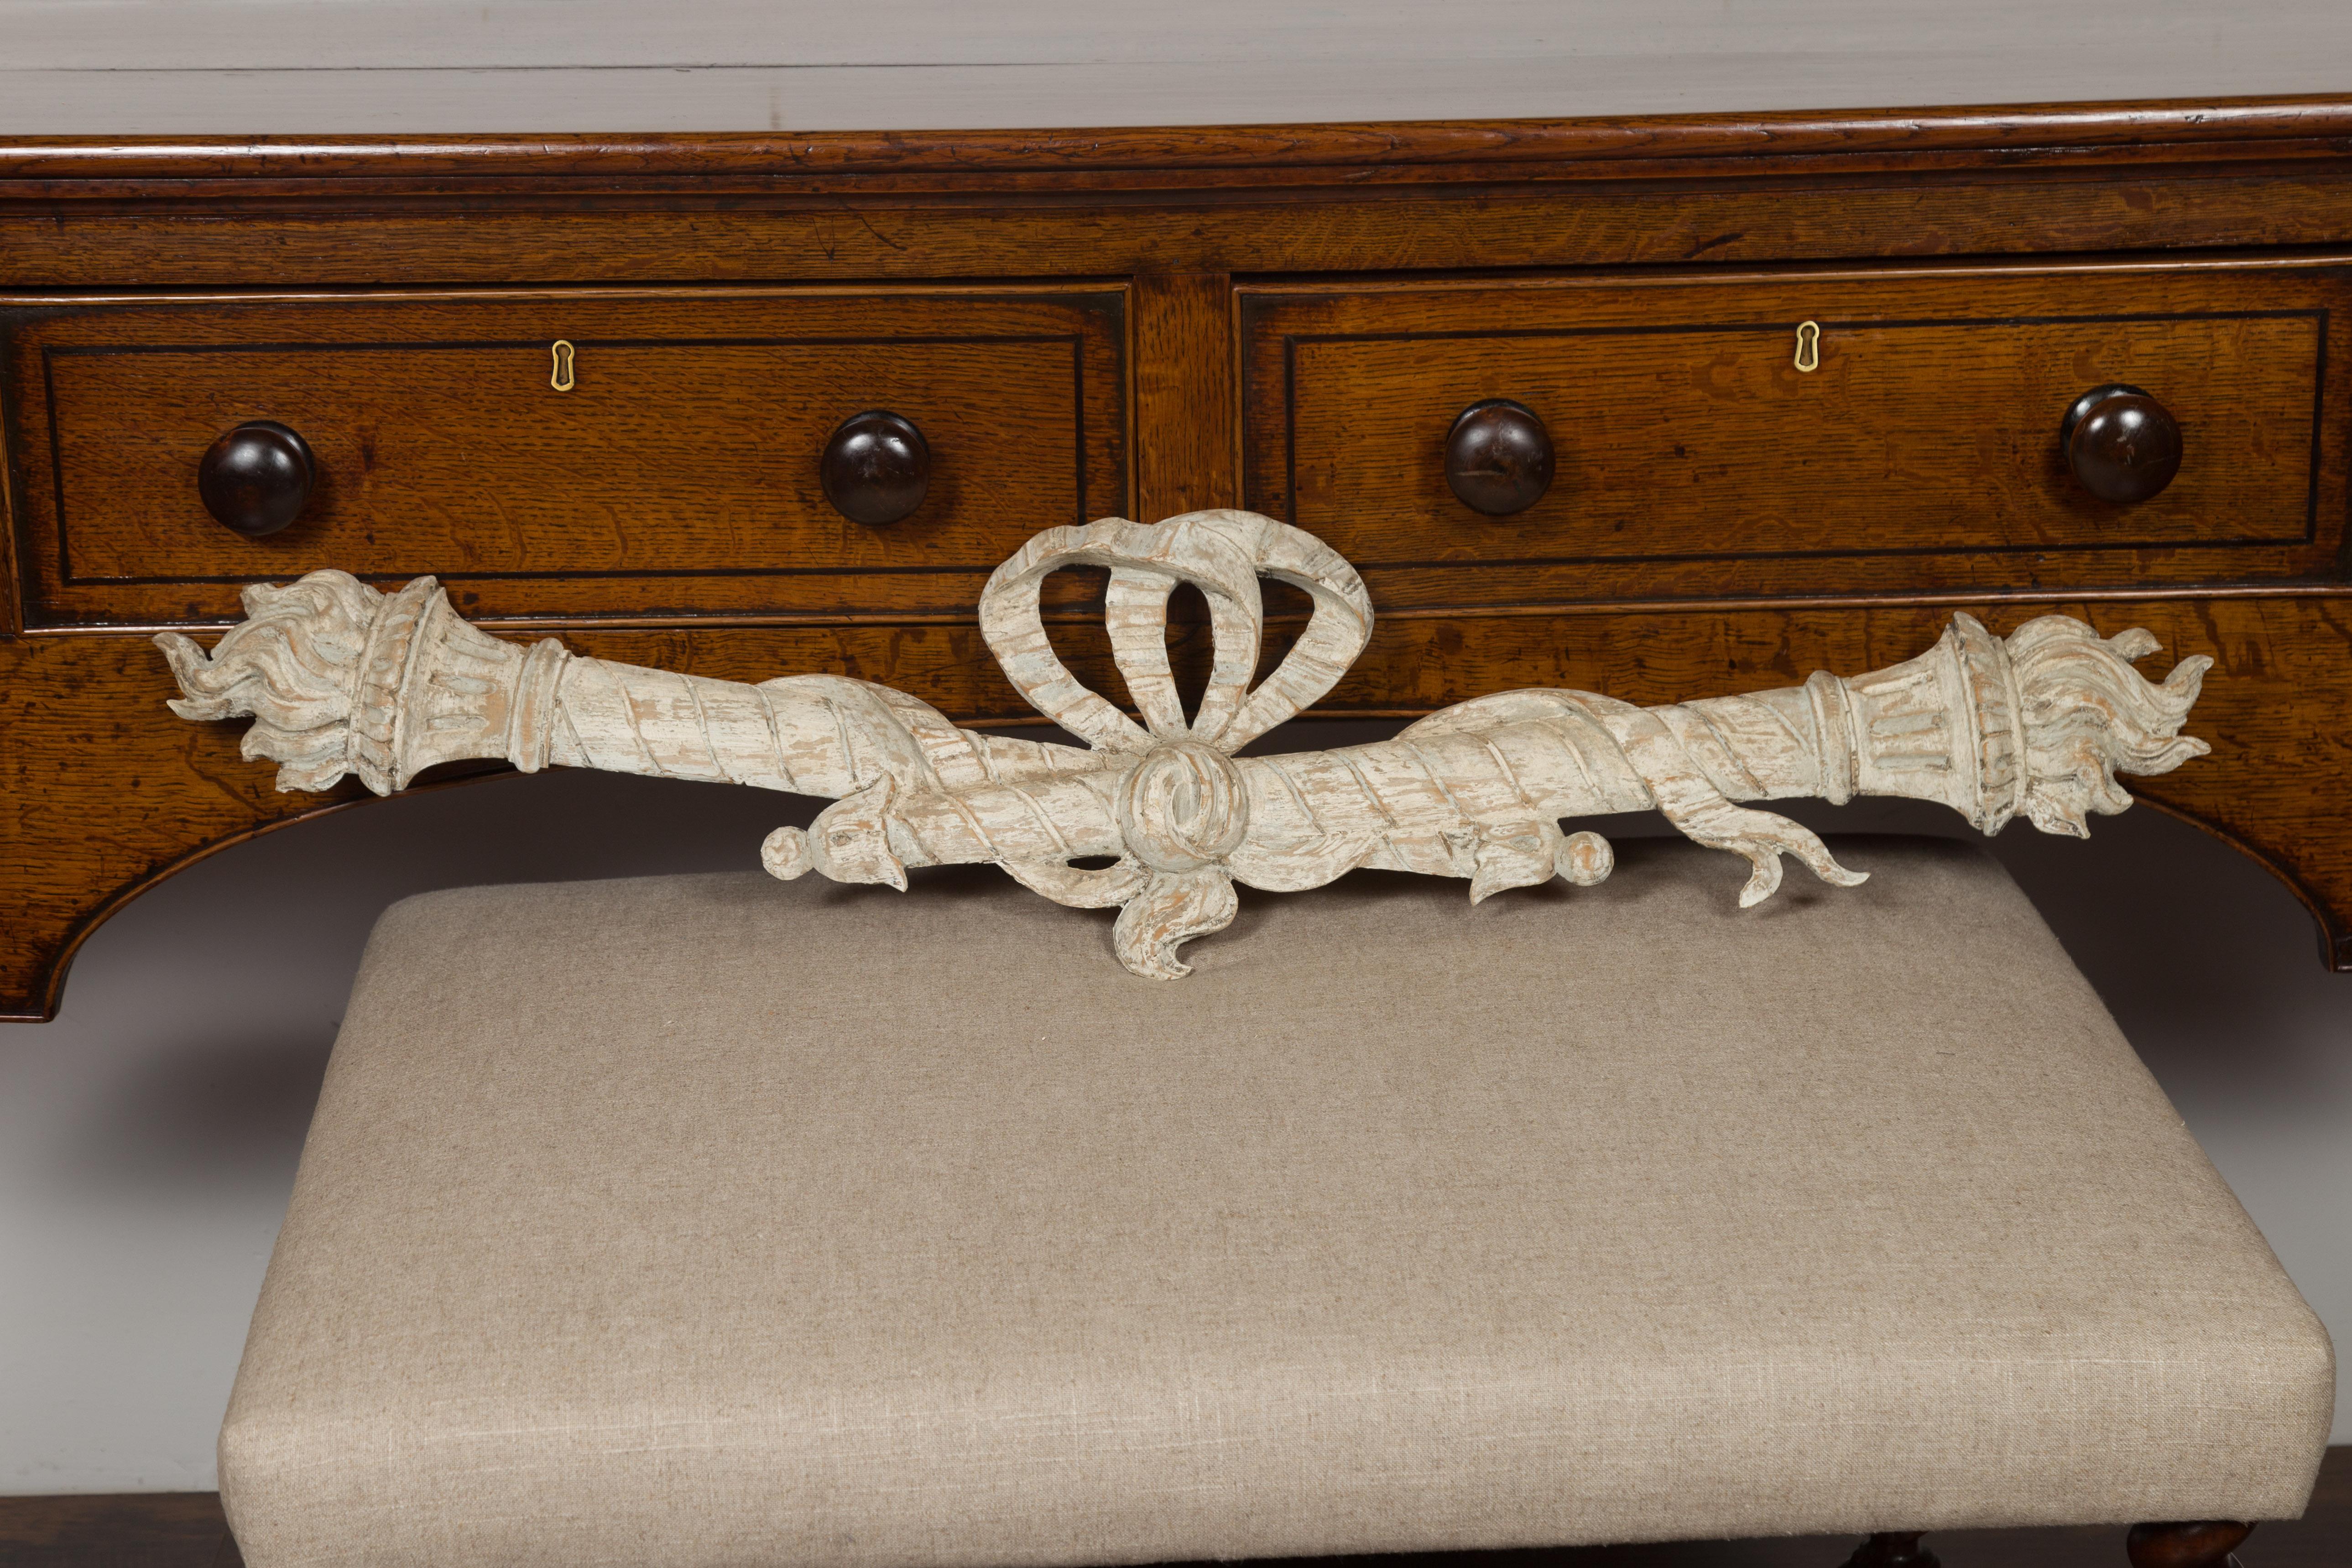 An Italian carved and painted architectural fragment from the 19th century, with ribbon-tied torches. Created in Italy during the 19th century, this horizontal carved fragment features a nicely distressed painted body with wood showing through,